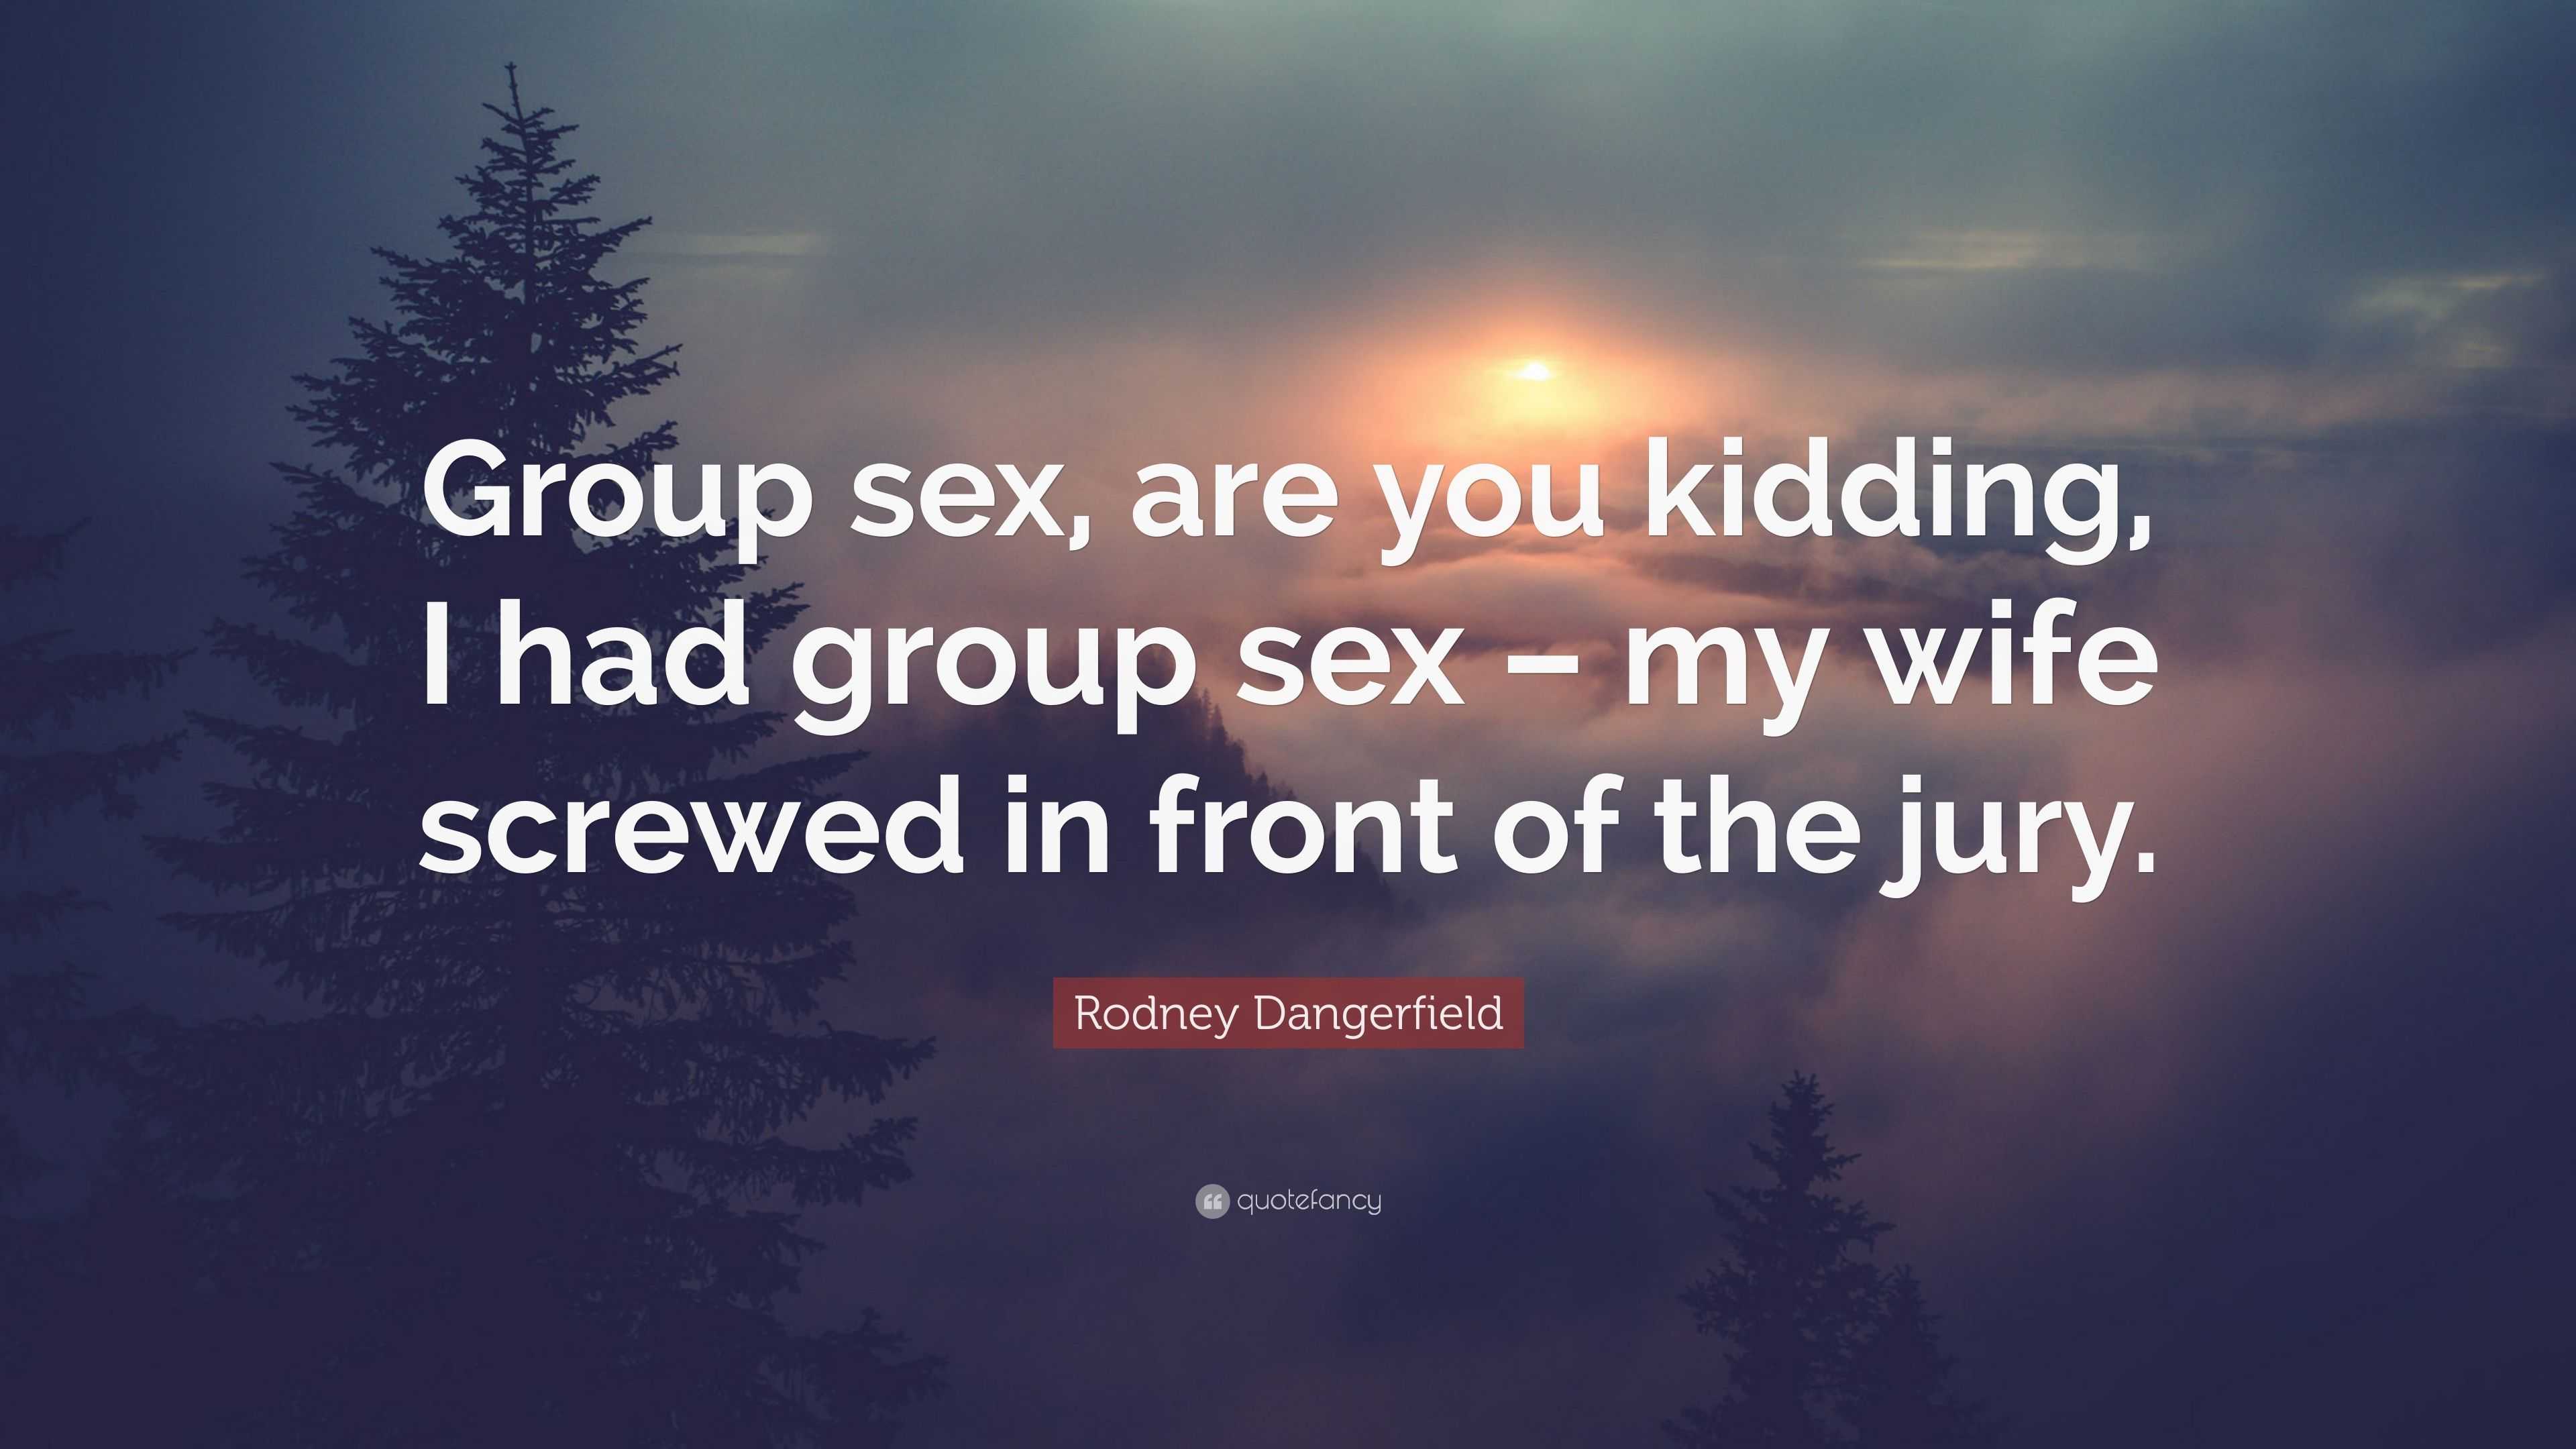 Rodney Dangerfield Quote “Group sex, are you kidding, I had group